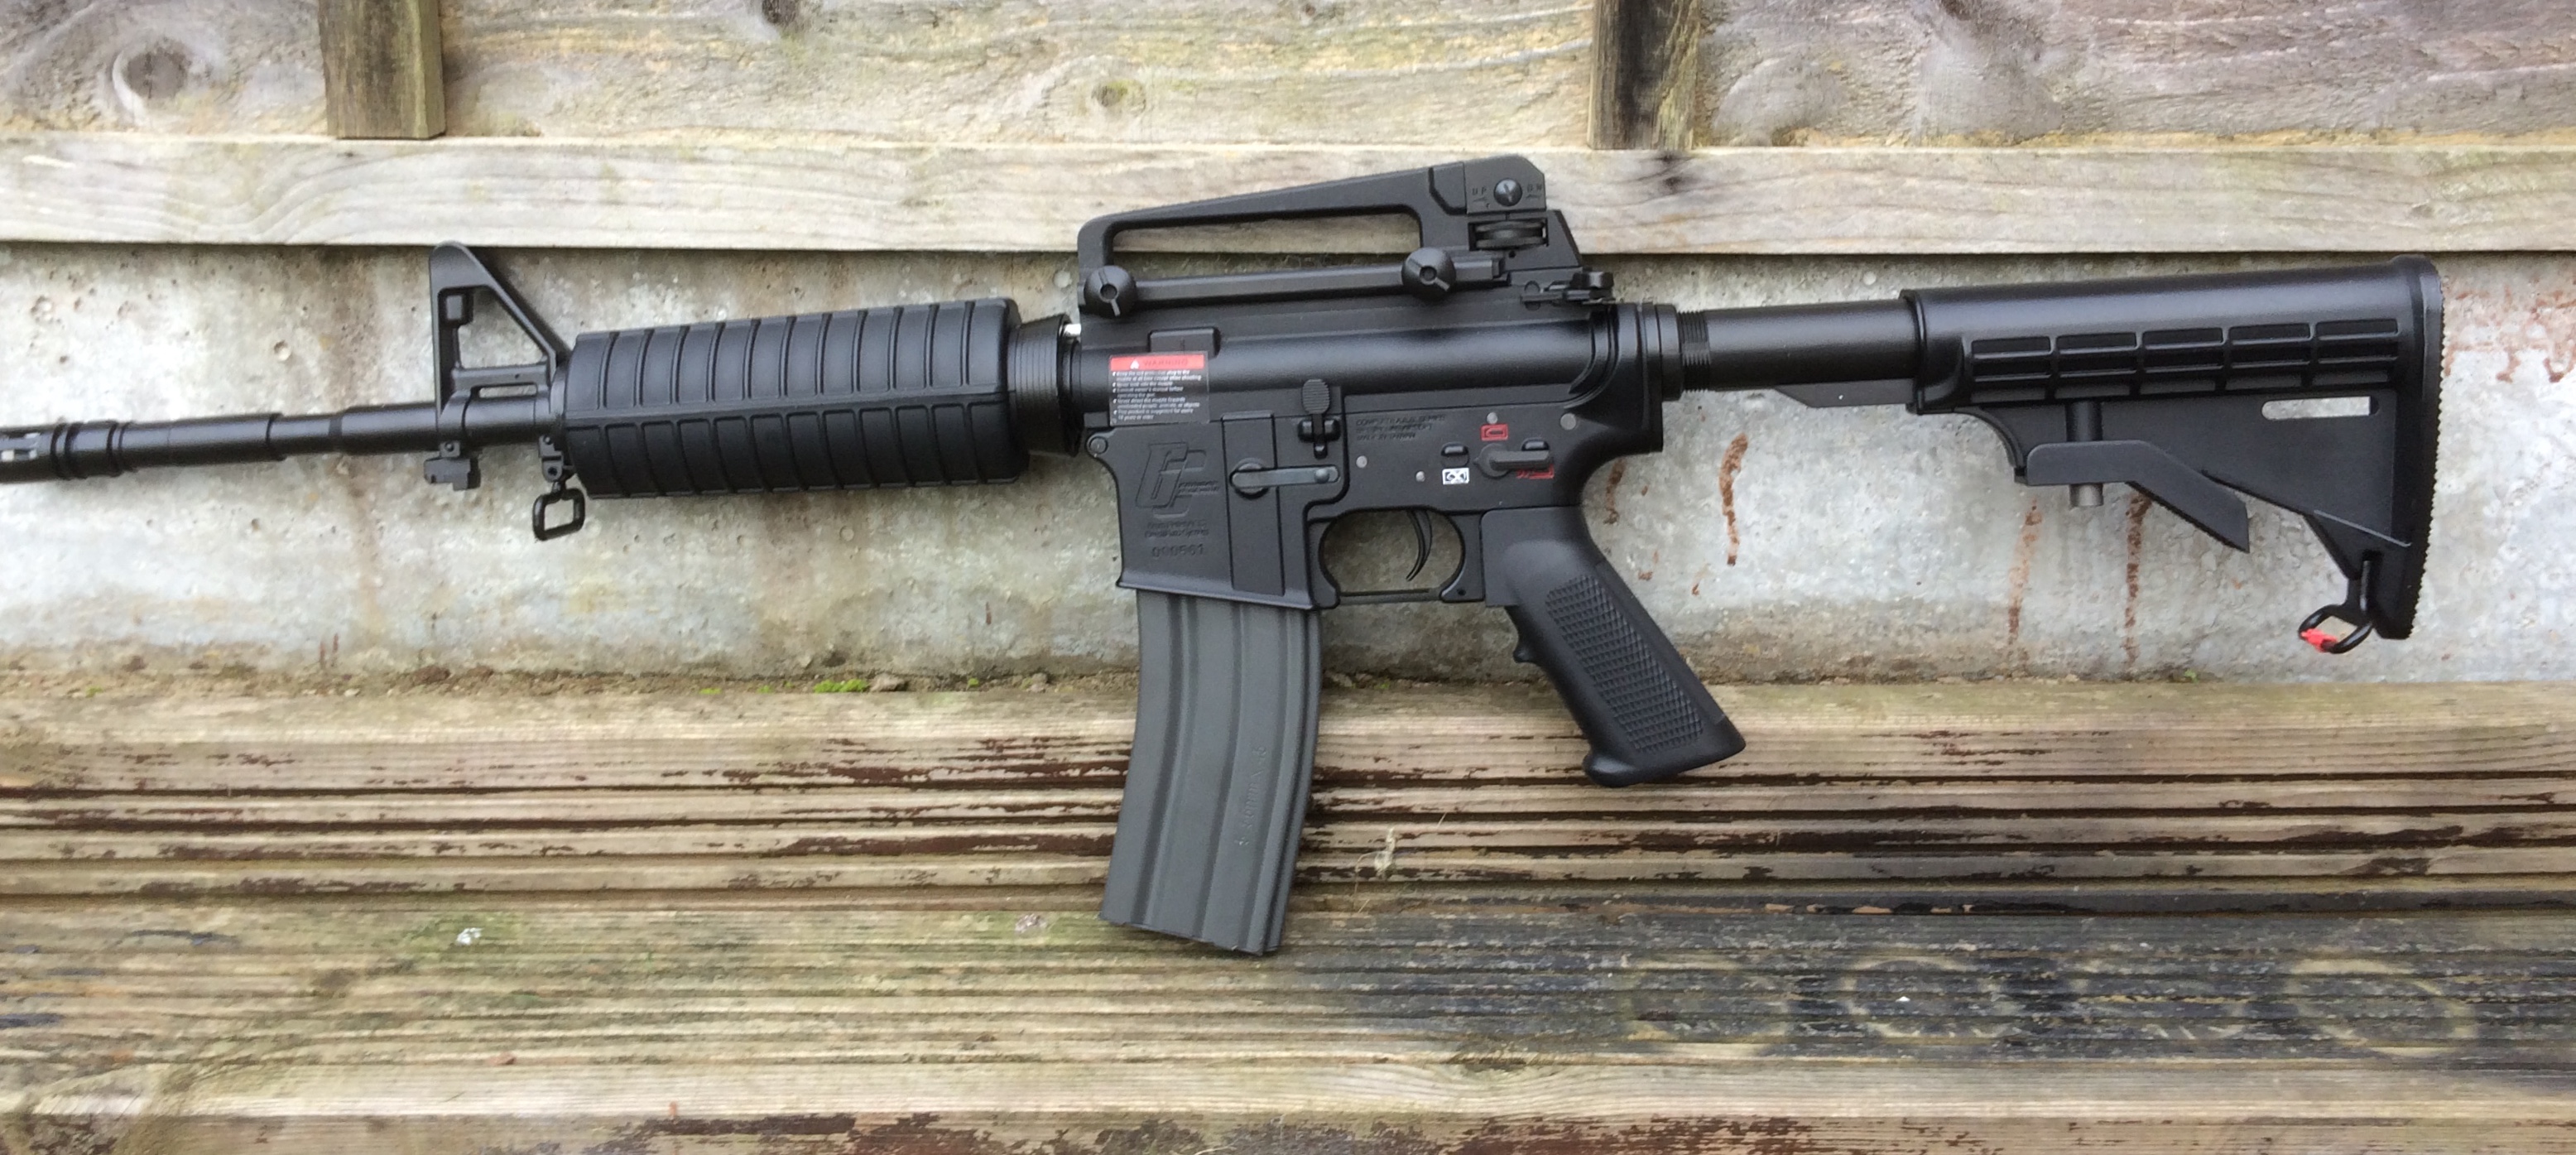 Gandg M4a1 Carbine Airsoft Rifle Buy And Sell Used Airsoft